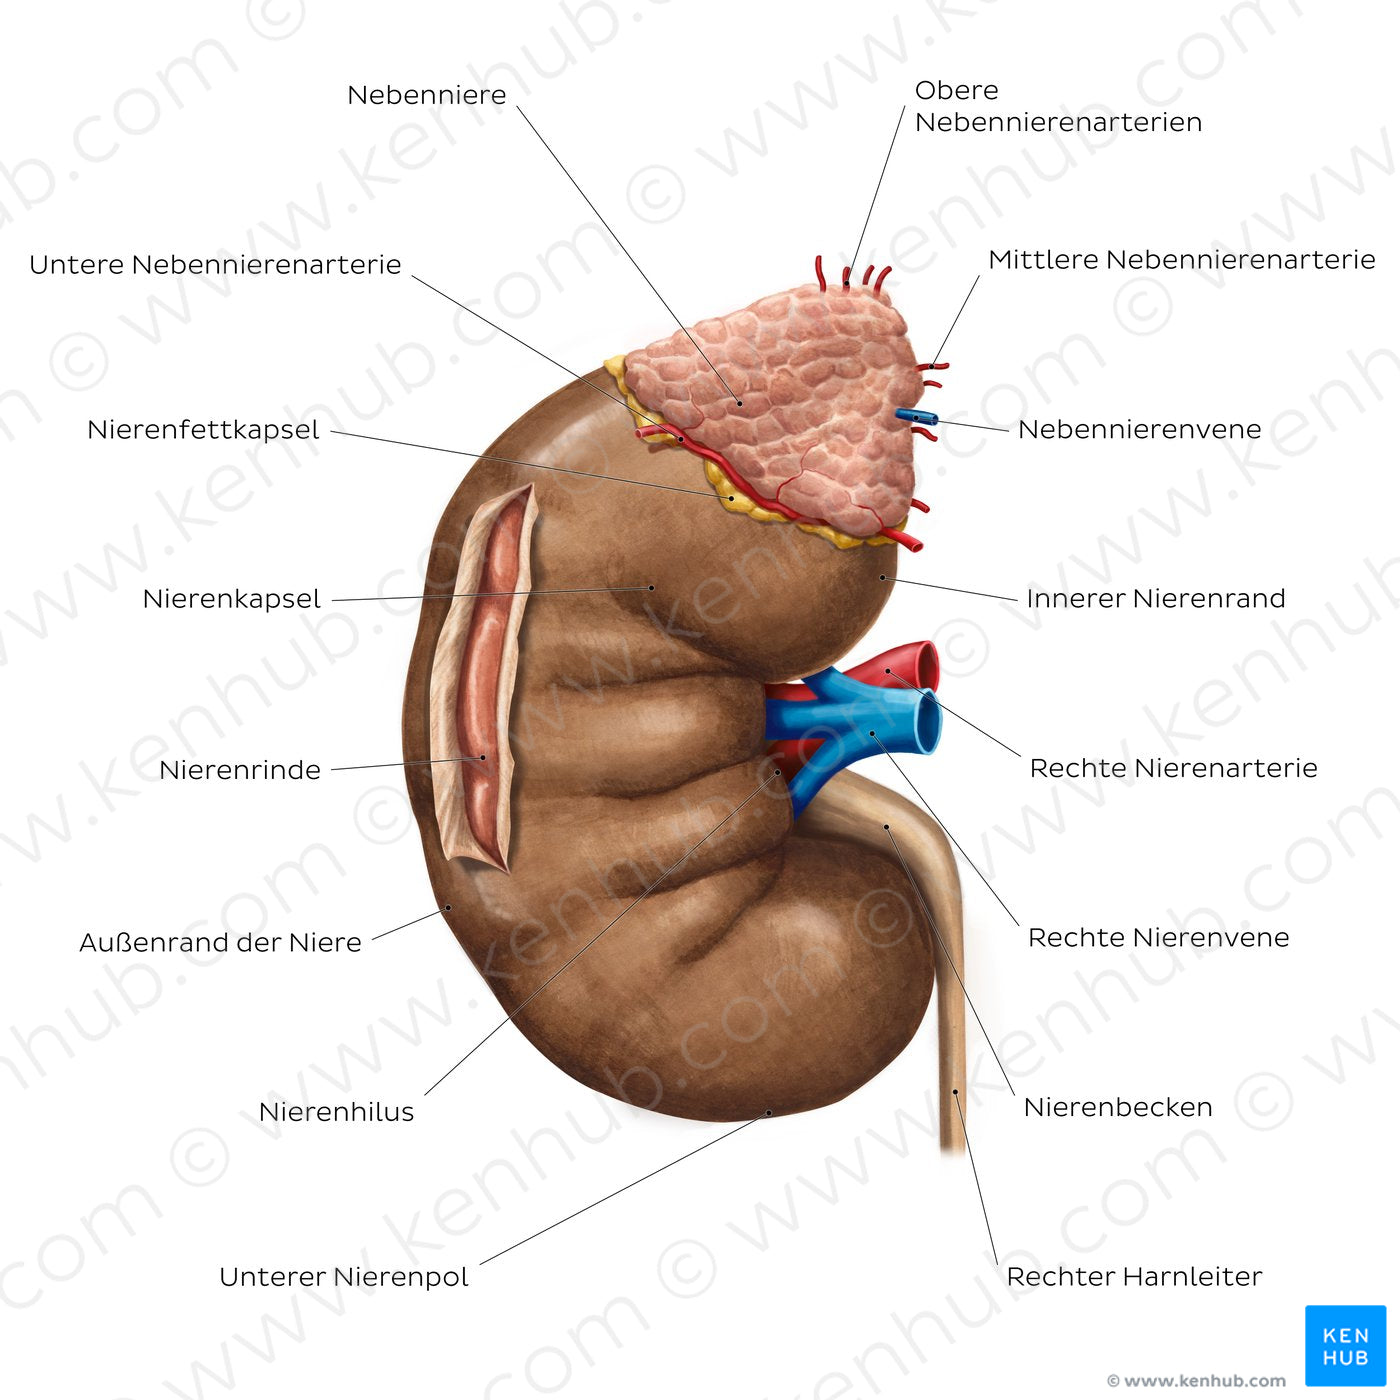 Overview of the kidney (German)